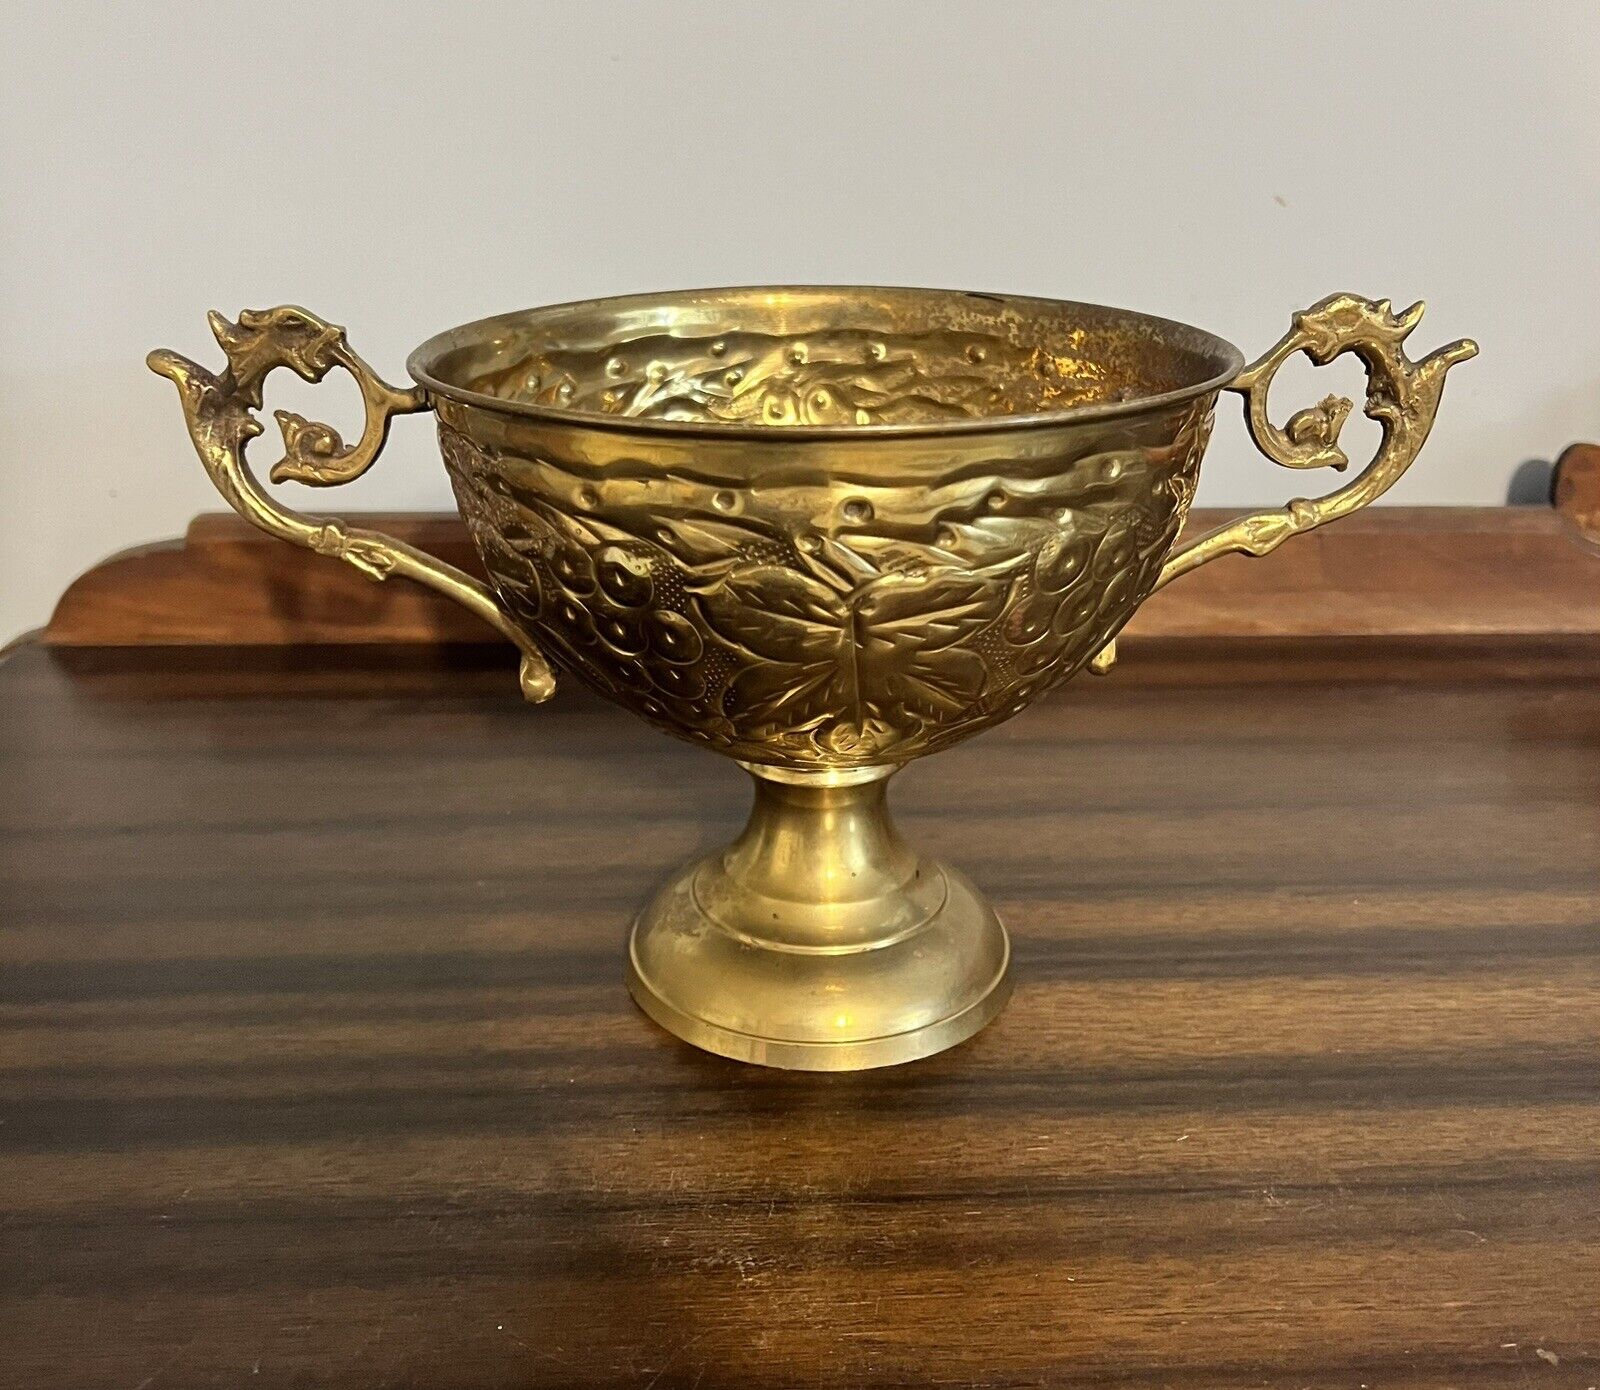 Antique Brass Footed Bowl with Arms Filigree Ornate Urn Chalice Goblet Vintage